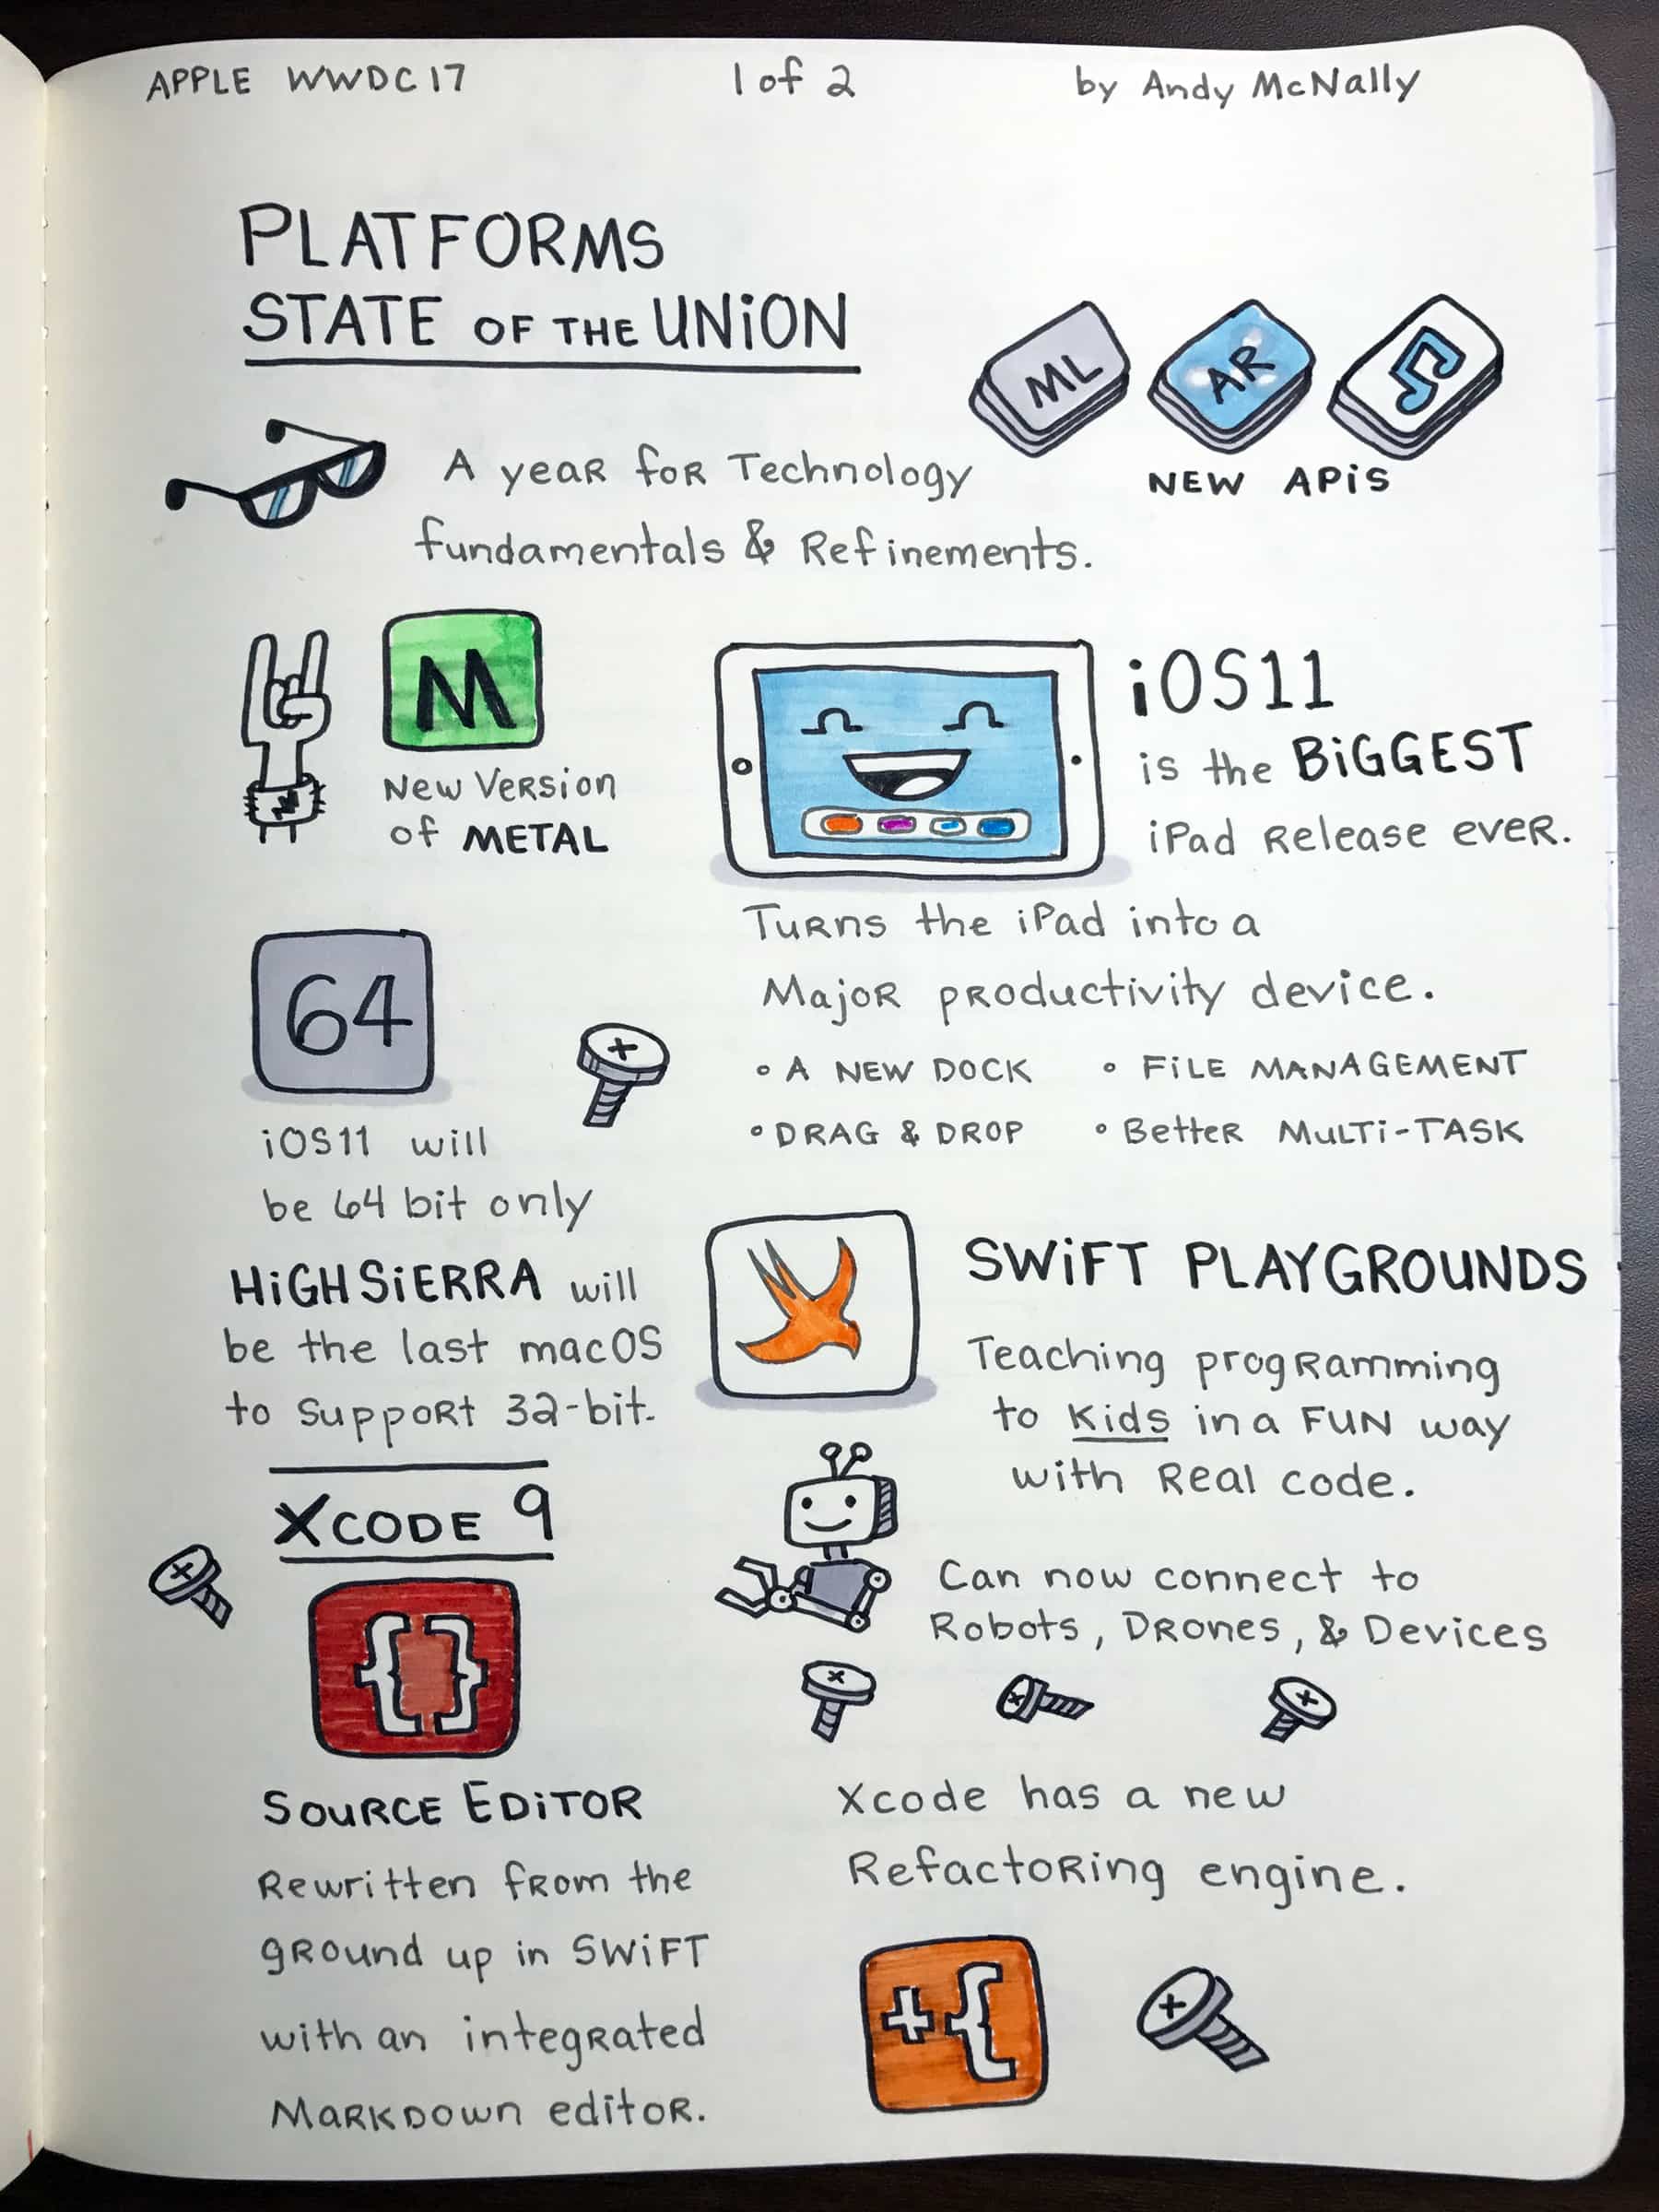 Apple WWDC 2017 Platforms State of the Union sketchnotes